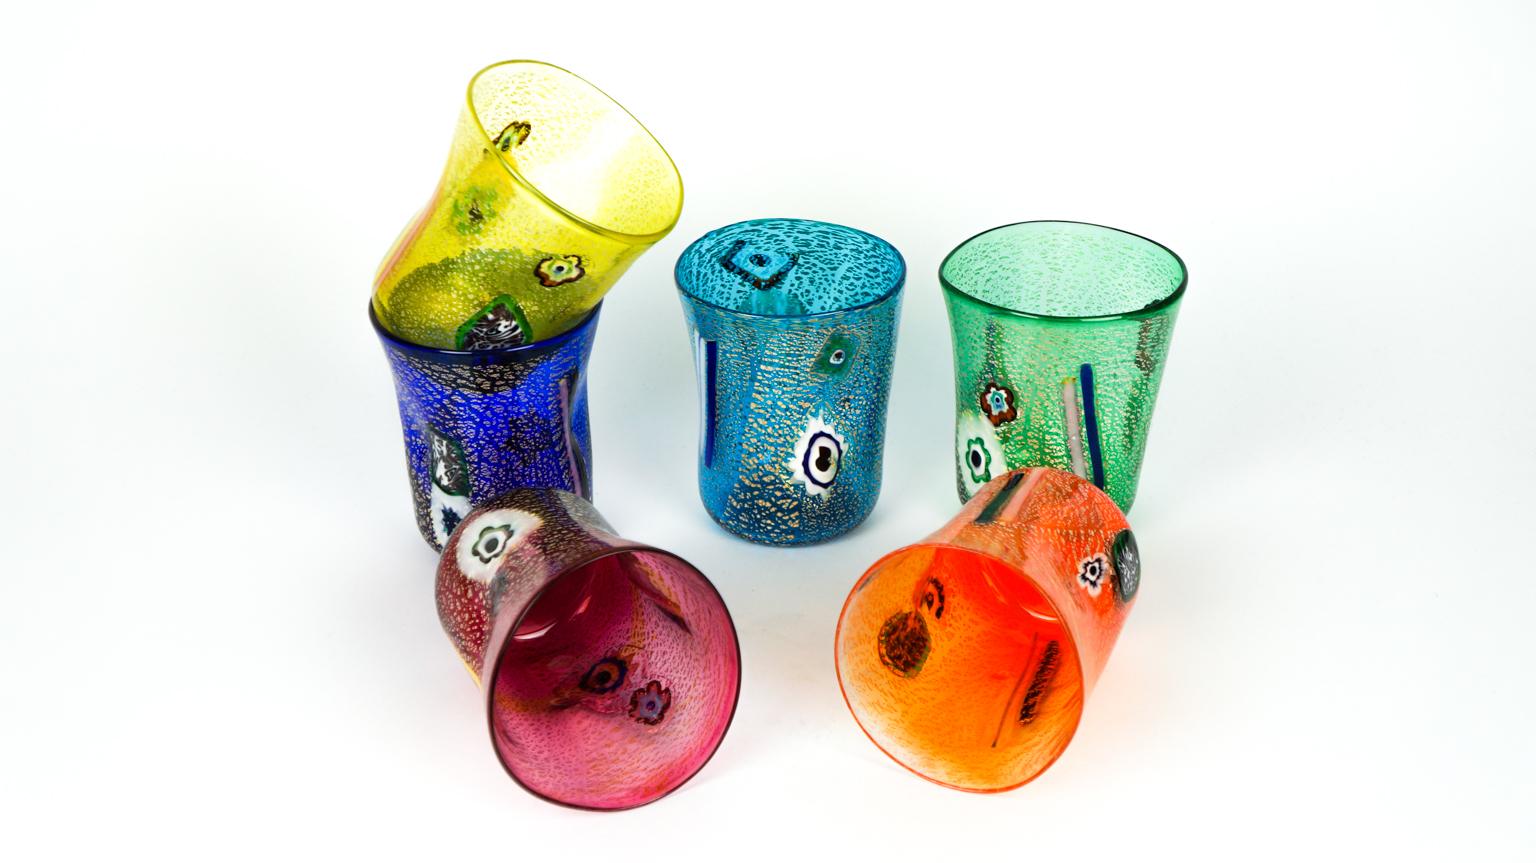 Magnificent series of 6 Murano glasses in venetian blown glass.
This set is called 